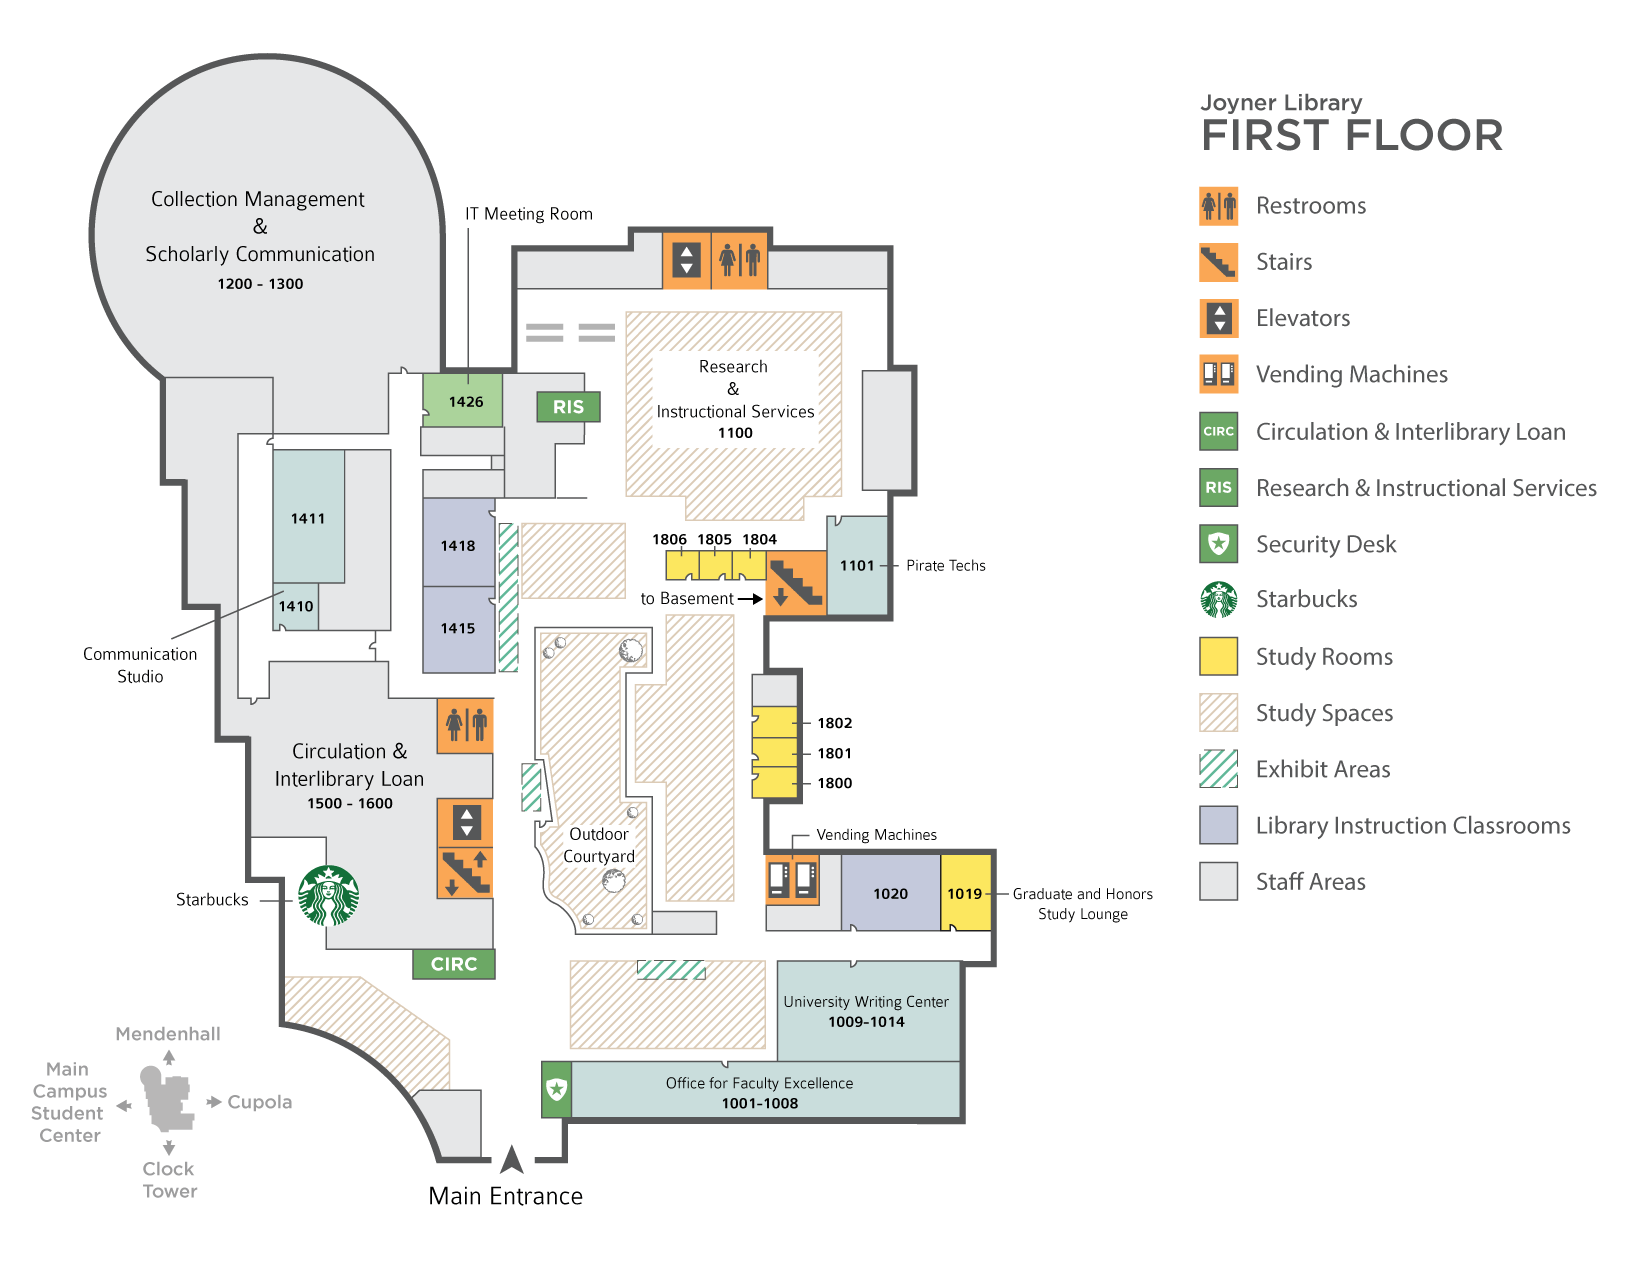 Map of the first floor of Joyner Library